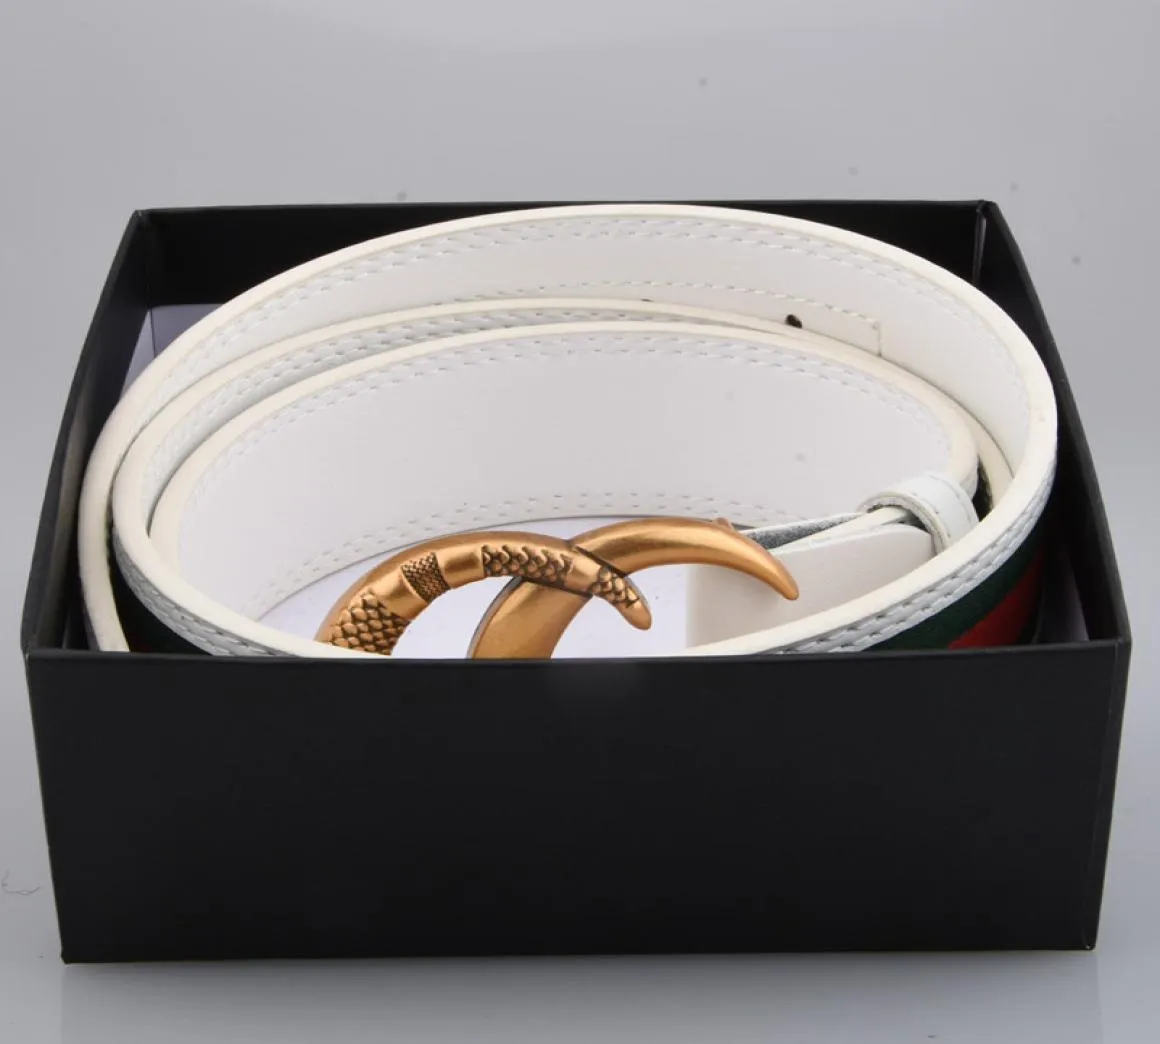 fashion with box leather belt for men woman women G big gold buckle t top mens snake belts whole9634540